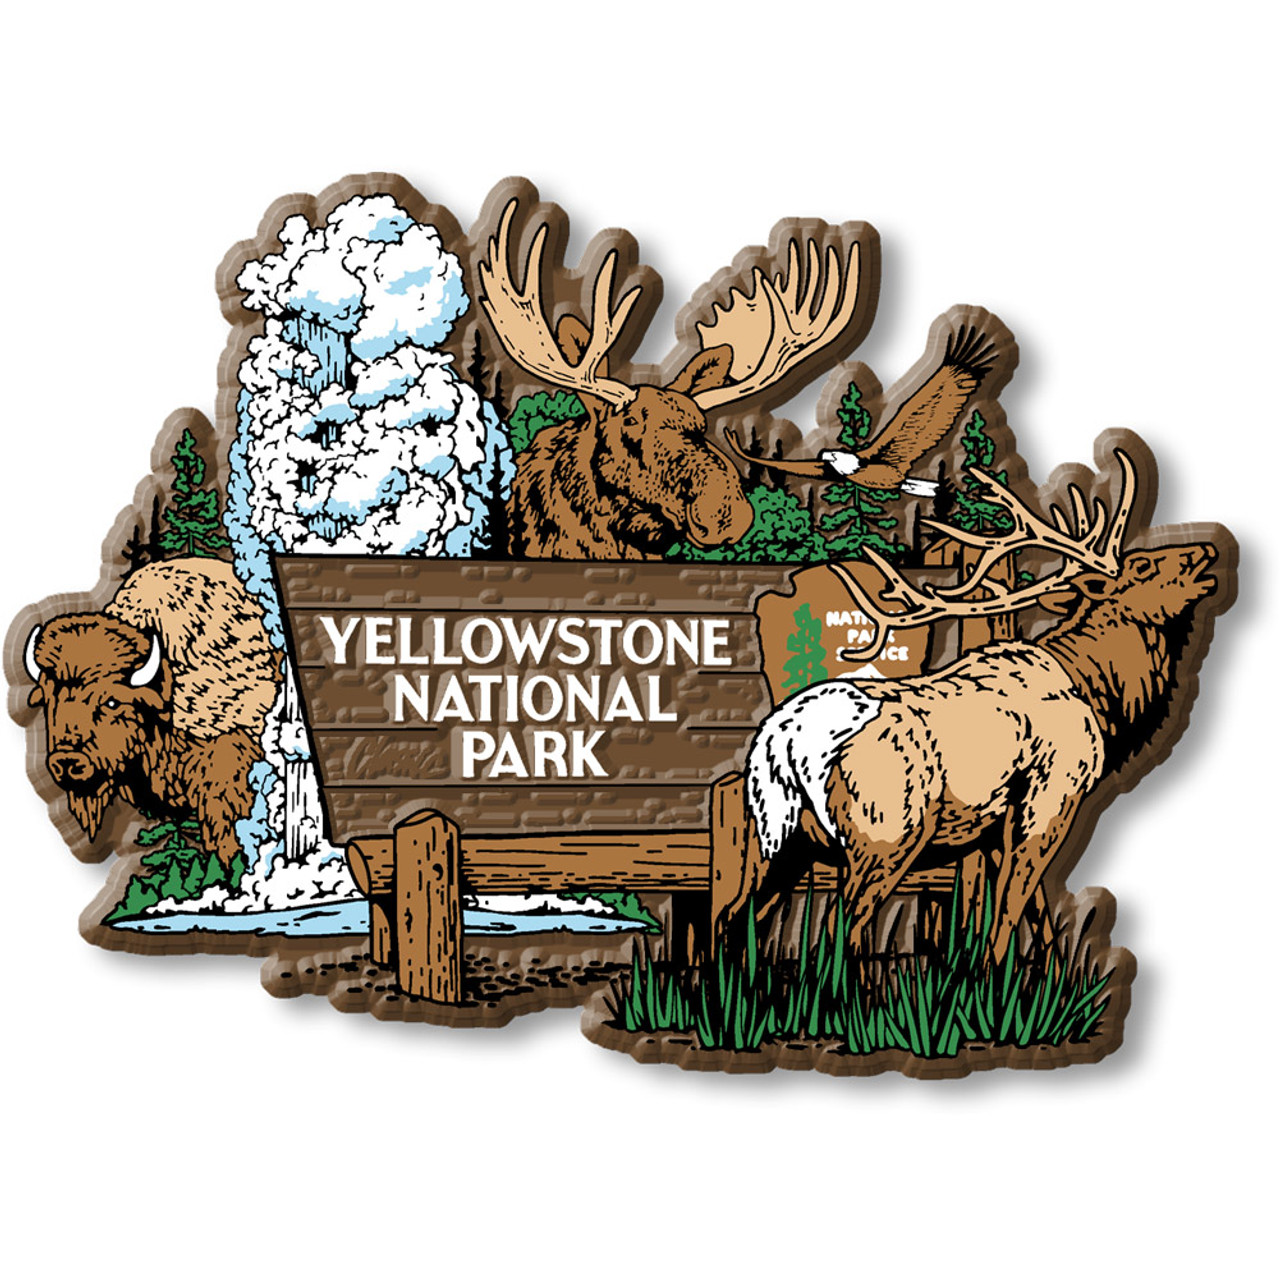 Yellowstone National Park Entrance Sign Magnet by Classic Magnets,  Collectible Souvenirs Made in the USA